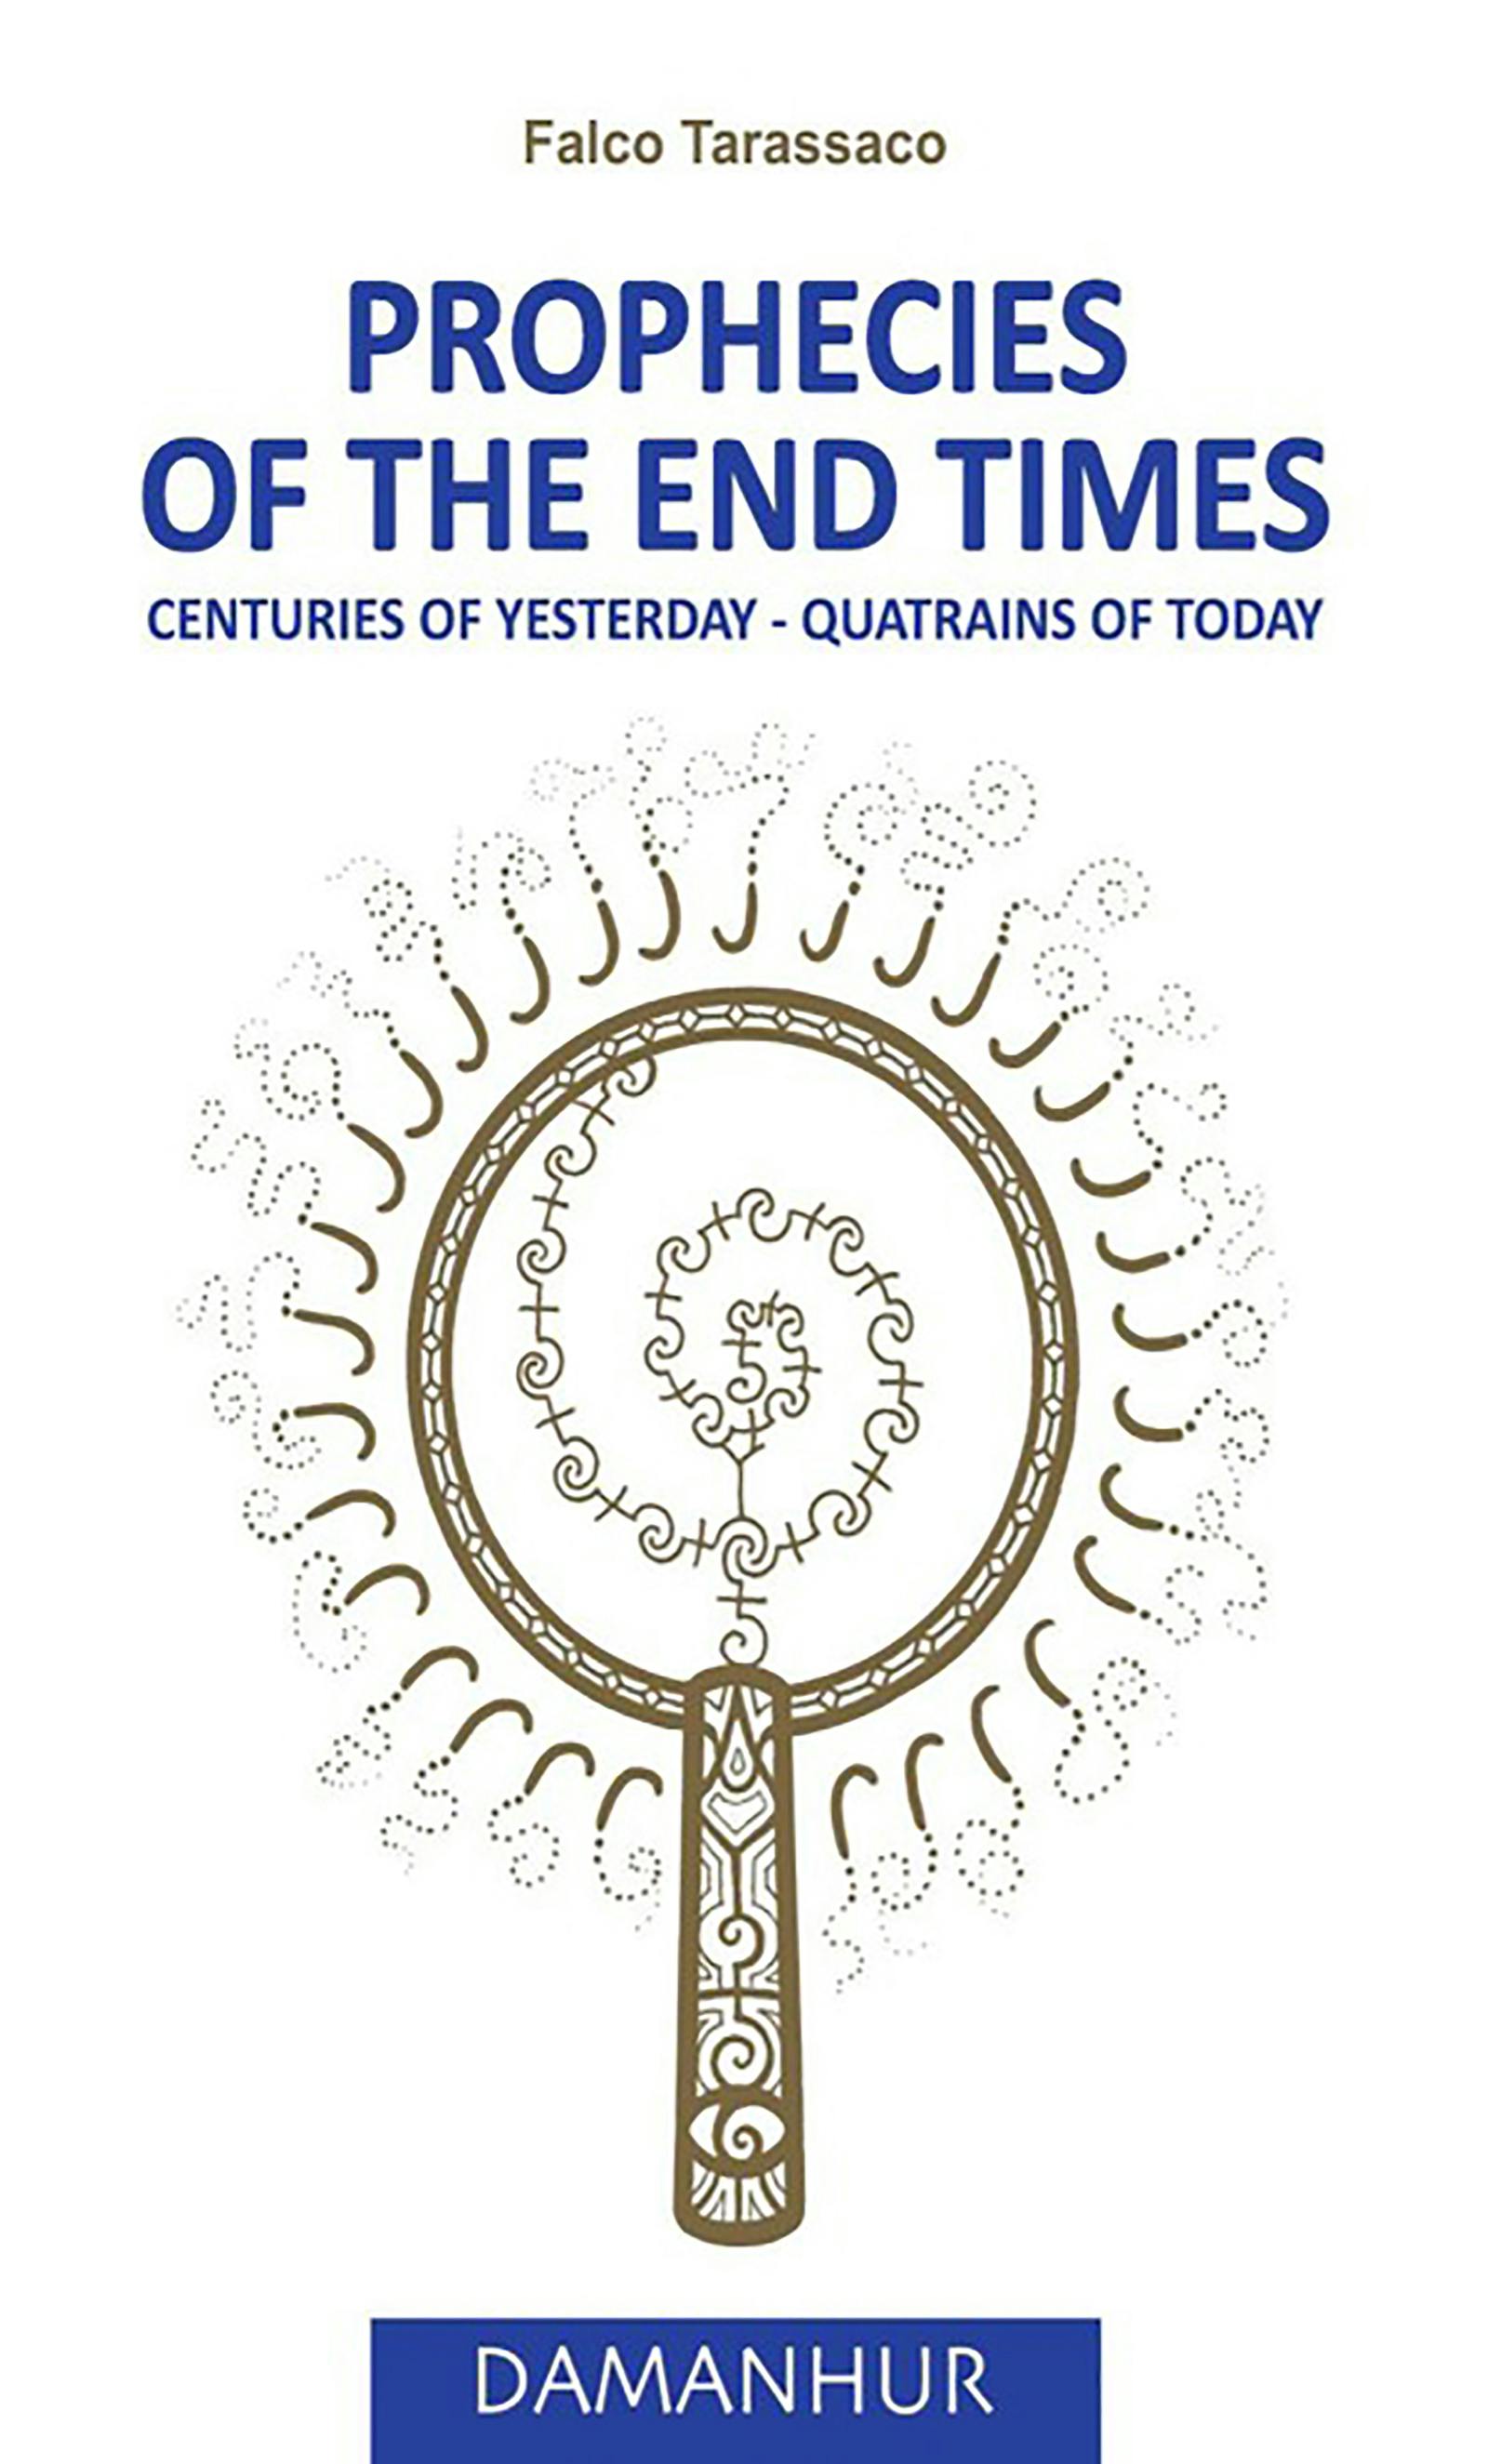 Prophecies of the end times - undefined